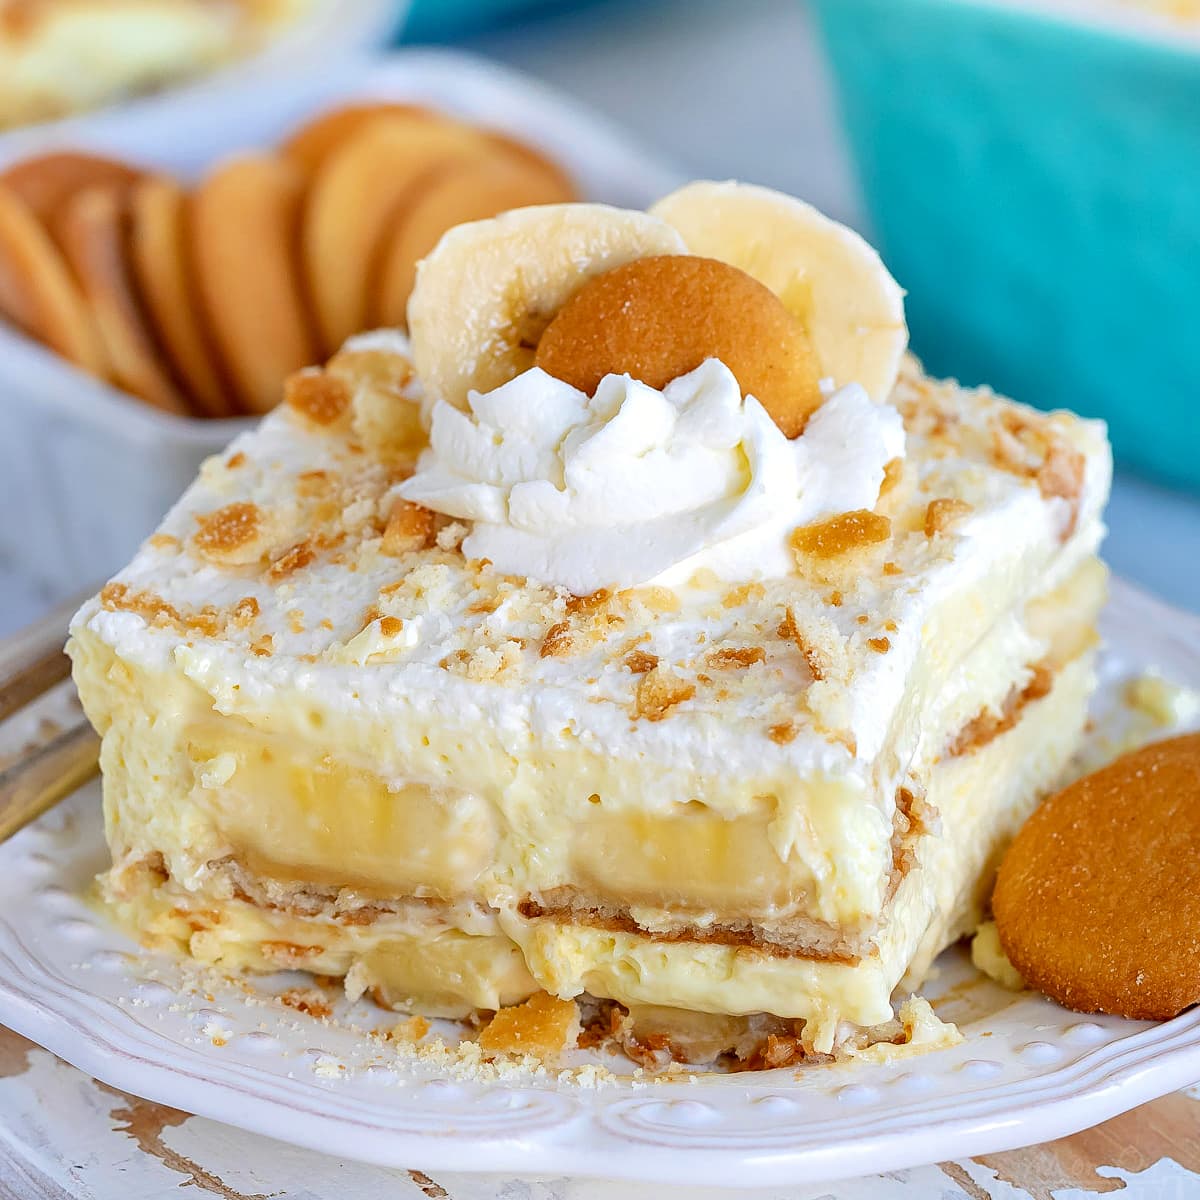 The Best Banana Pudding Recipe Served On A White Plate Garnished With Whipped Cream And Nilla Wafers Square Image 